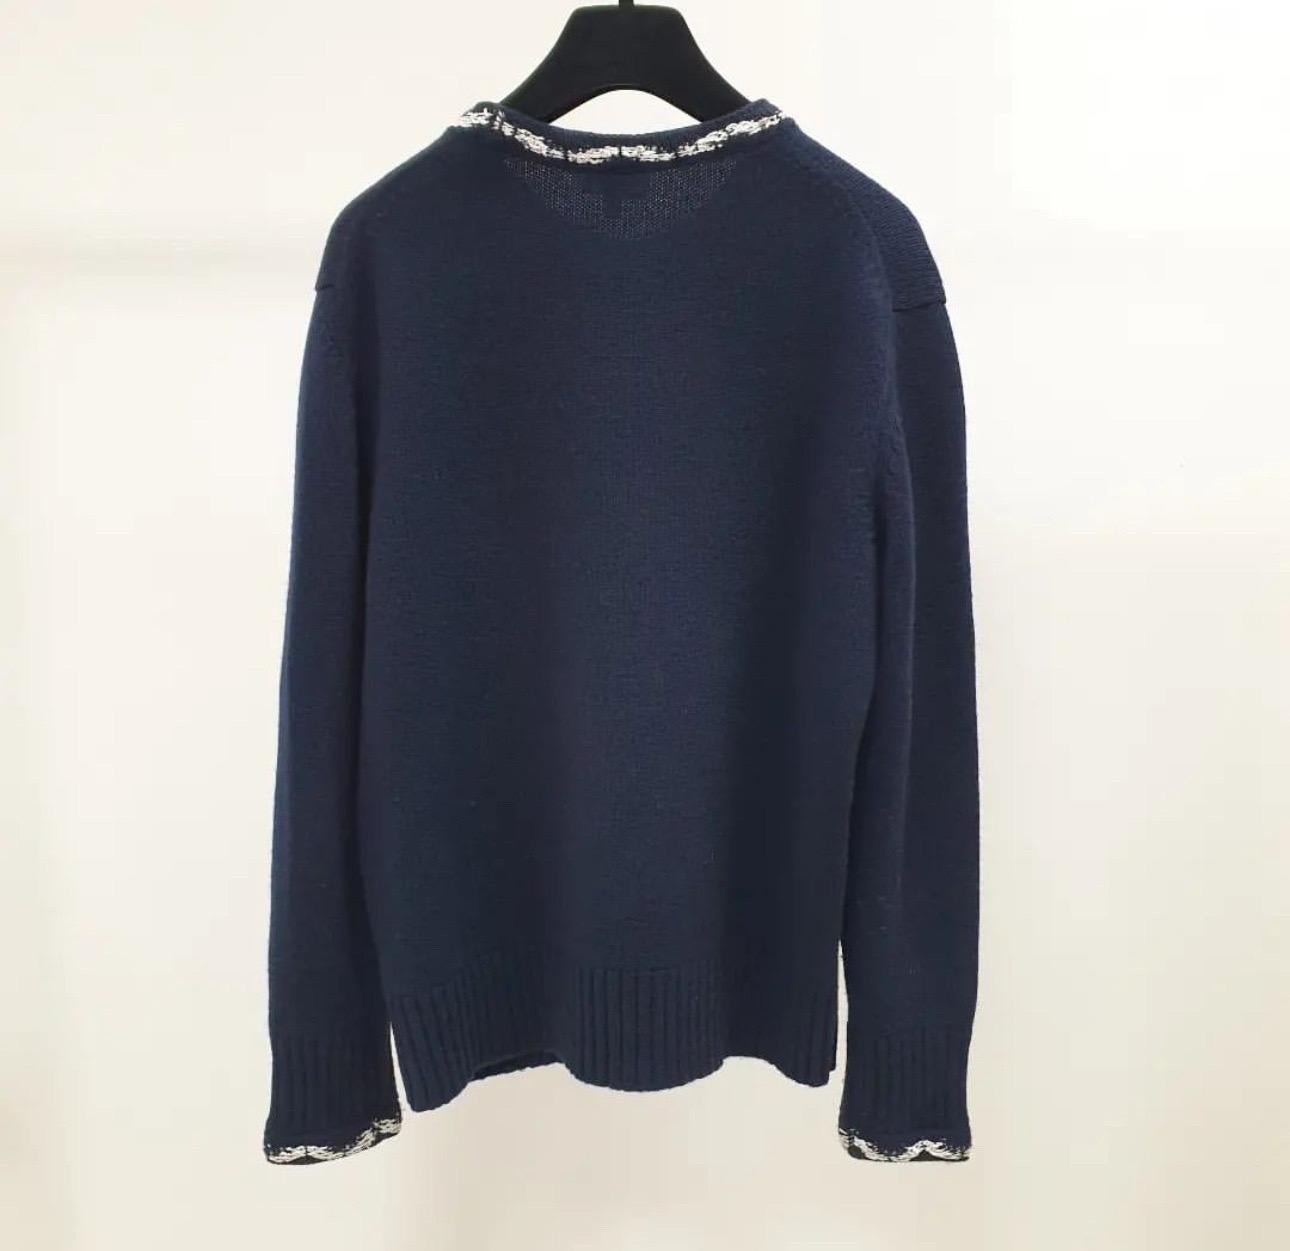 Chanel 'CC' Logo Cashmere Sweater

From 2021 collection in navy blue cashmere with white 

oversized 'CC' logo to the chest. Fancy tweed trim same colours to 

the neckline and cuffs.

Size - 36FR

Condition - Excellent